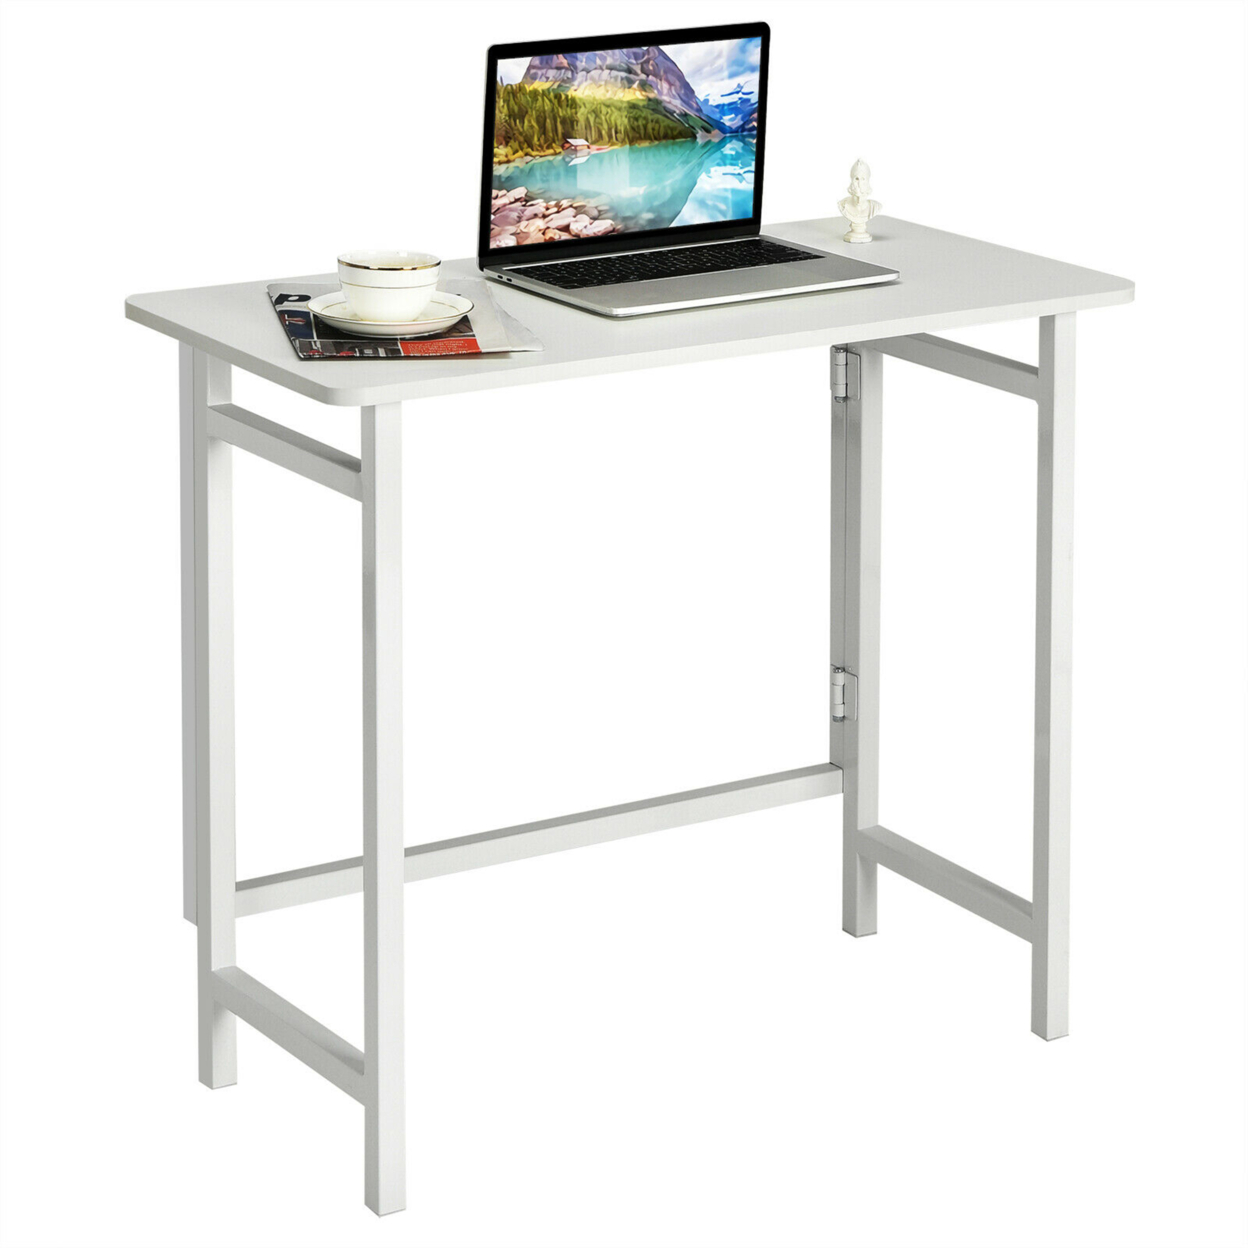 Folding Table Computer Desk PC Laptop Writing Table Home Office Workstation